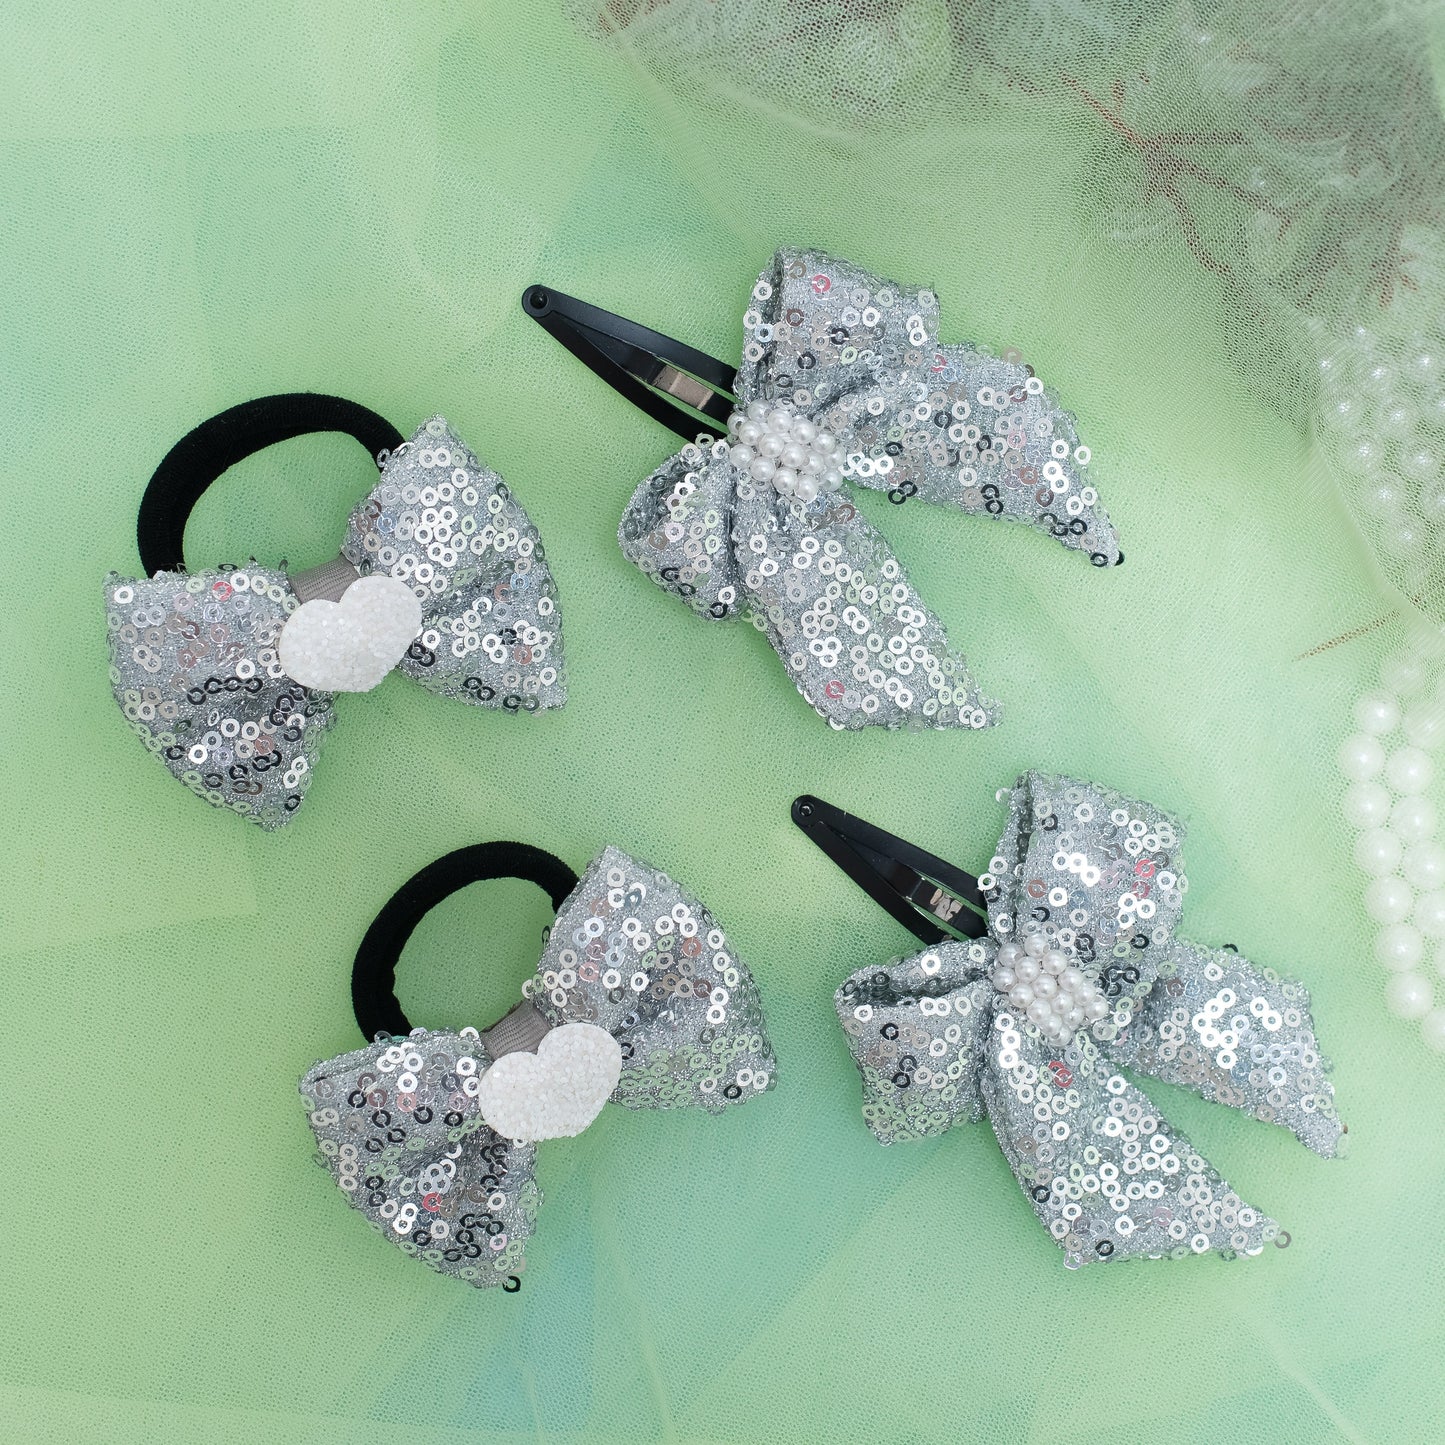 Combo: Sequined bow on Tic-Tac Pins and Rubberbands - Silver (Set of 1 pair Tic-tac clips and 1 pair Hair-ties = 4 quantity)